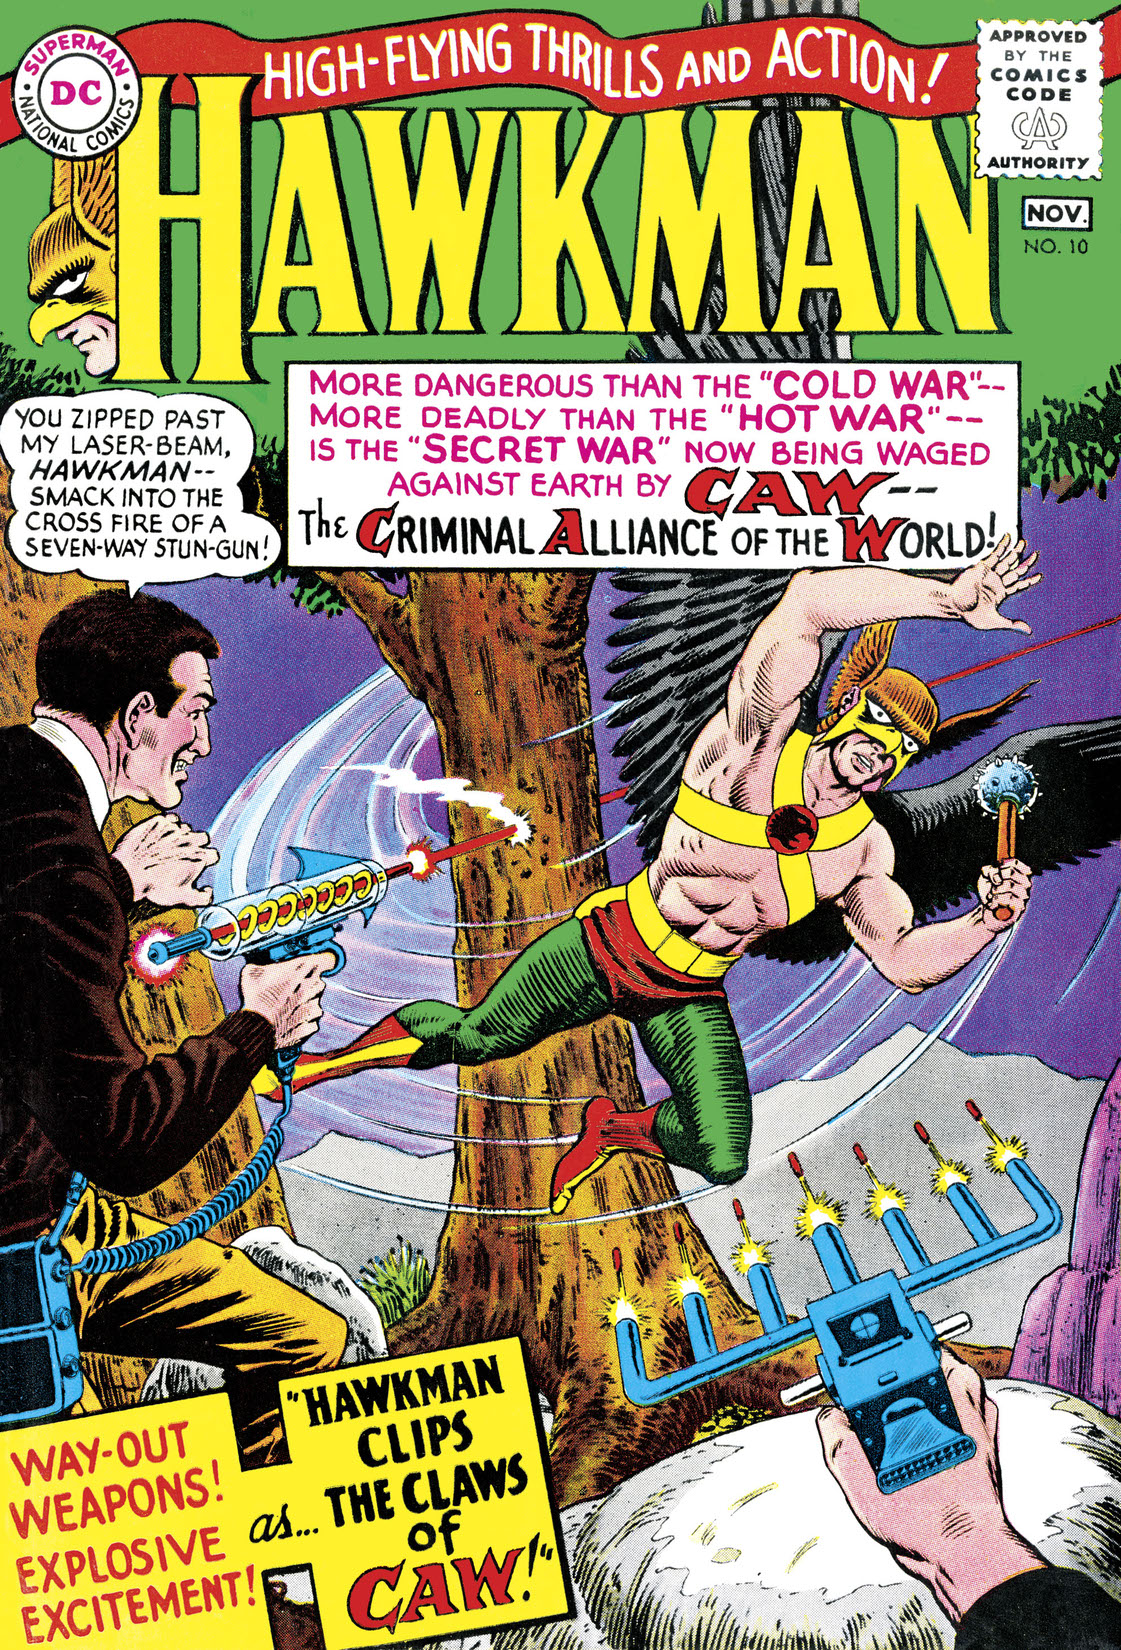 Hawkman (1964-) #10 preview images